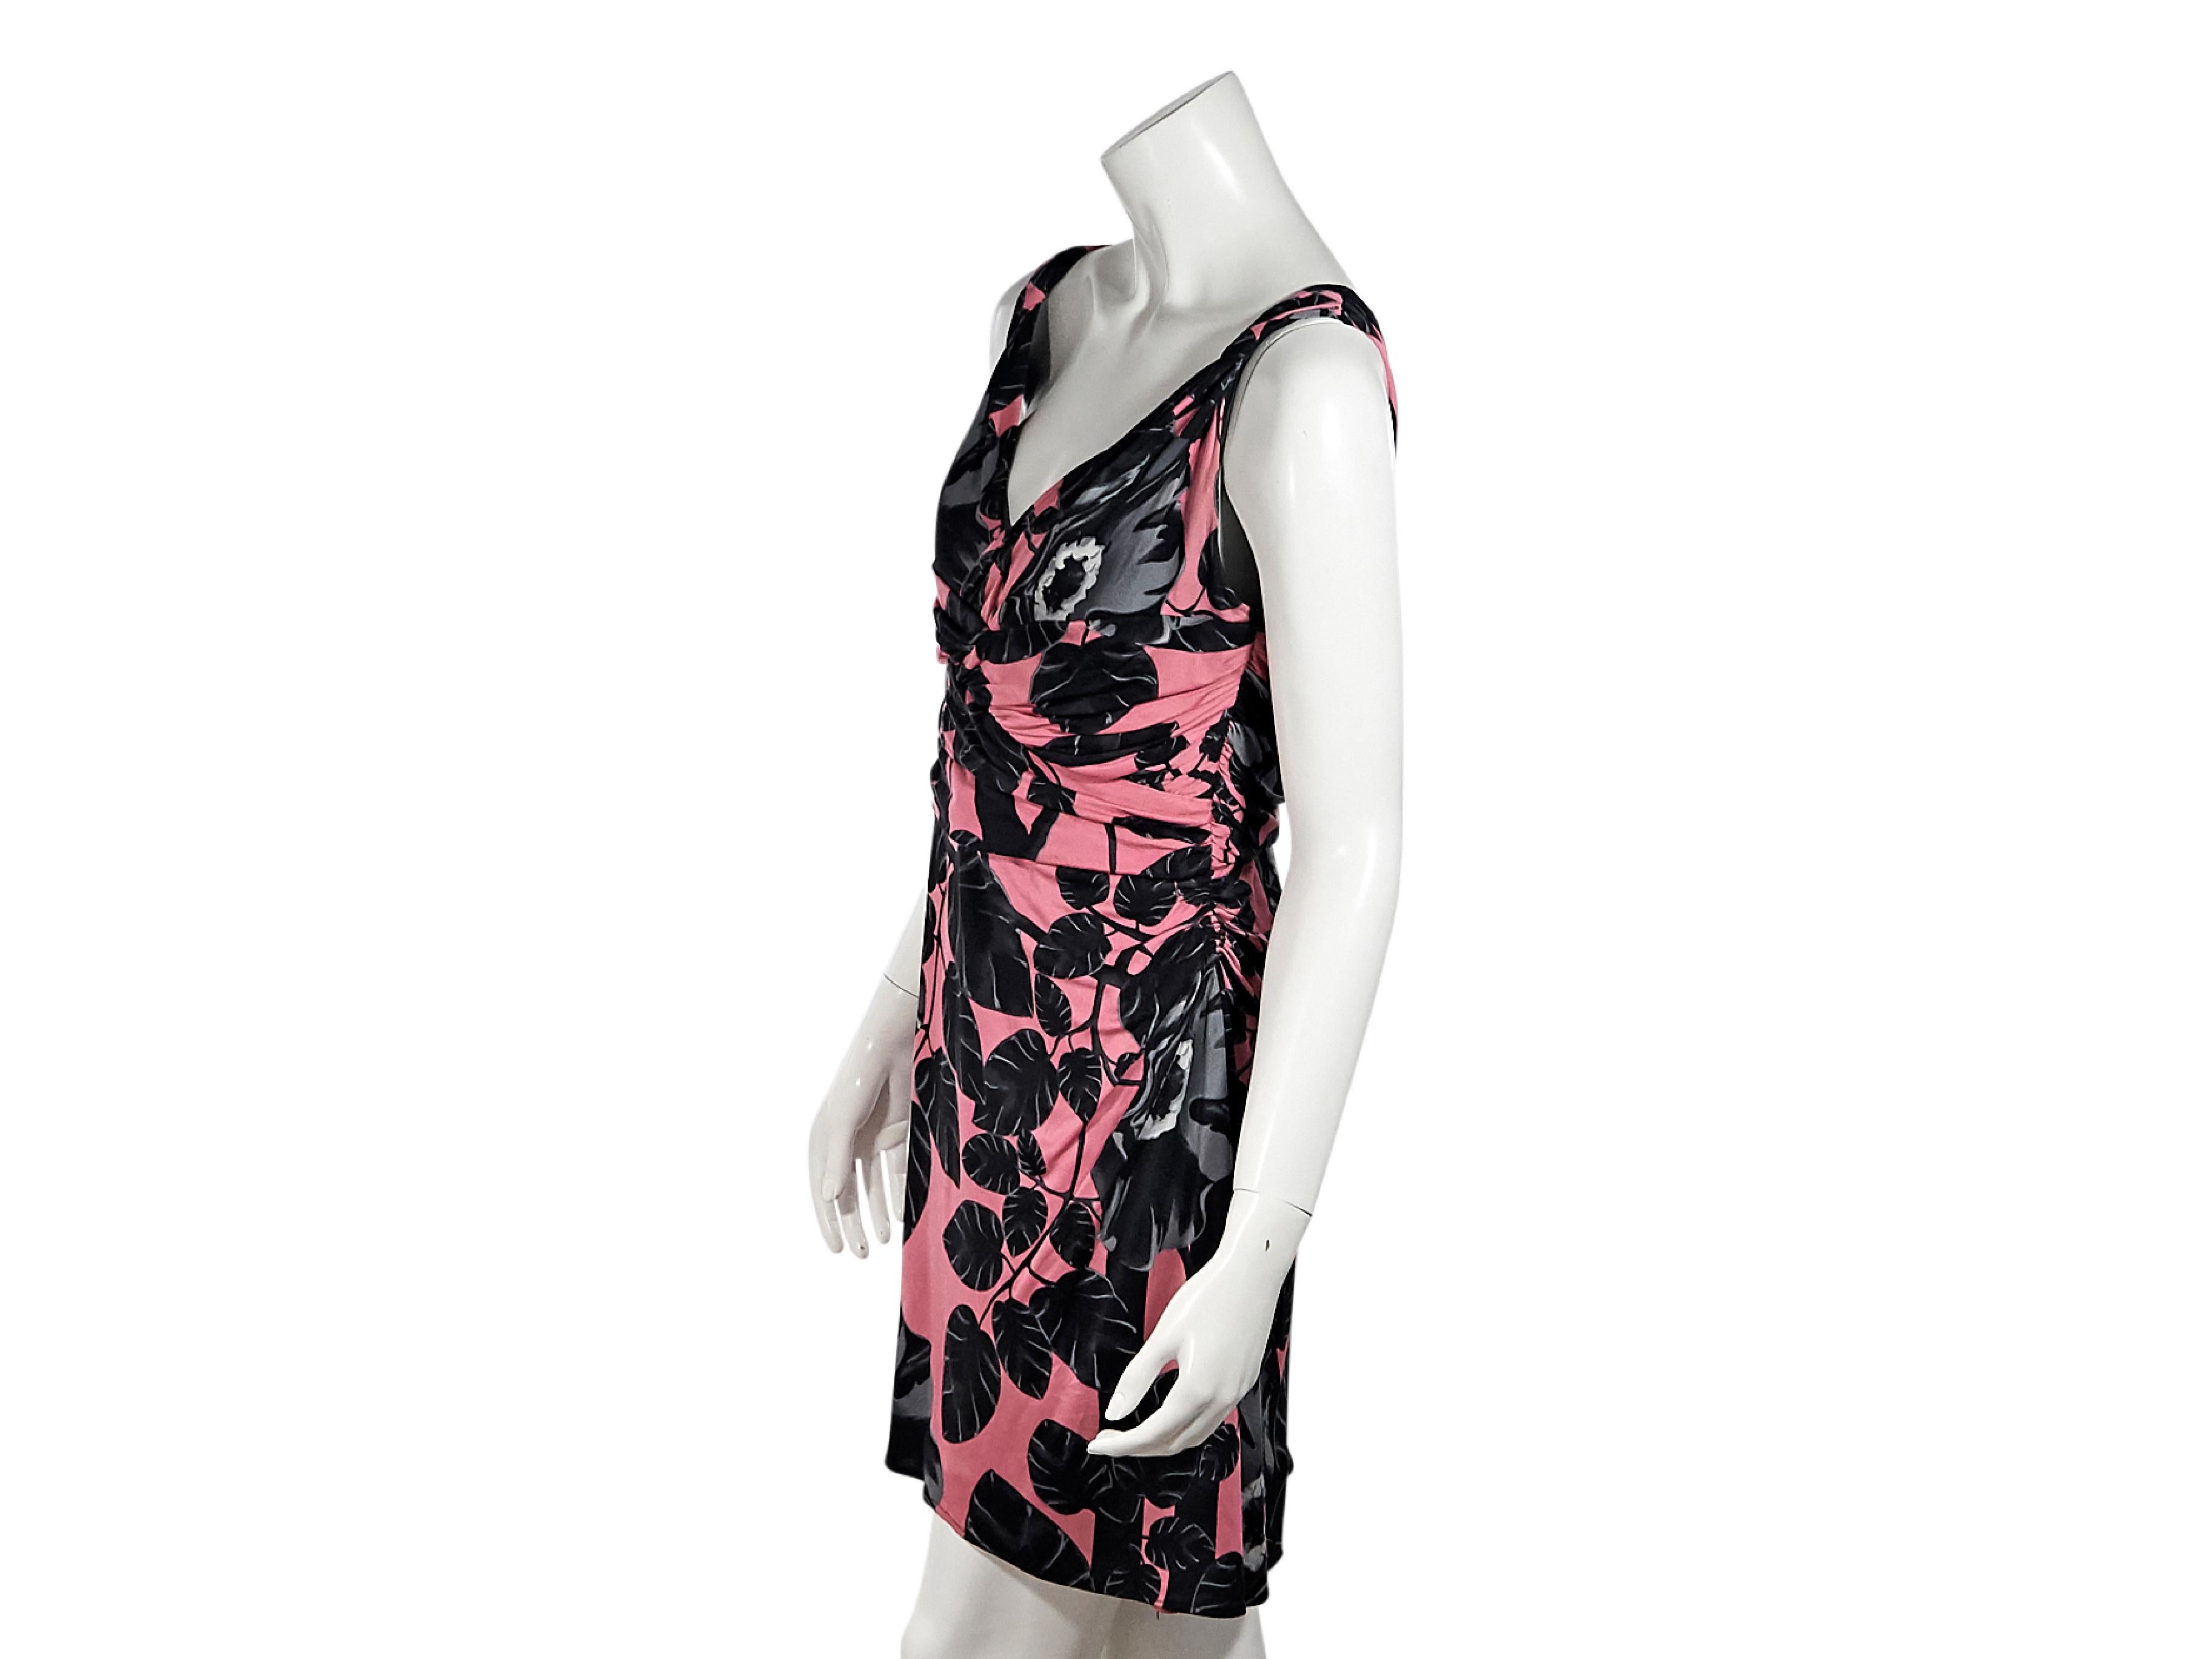 Product details:  Pink and black floral-printed silk-blend jersey dress by Versace.  Double v-neck.  Sleeveless.  Ruched bodice creates a flattering silhouette.  Concealed side zip closure.  31